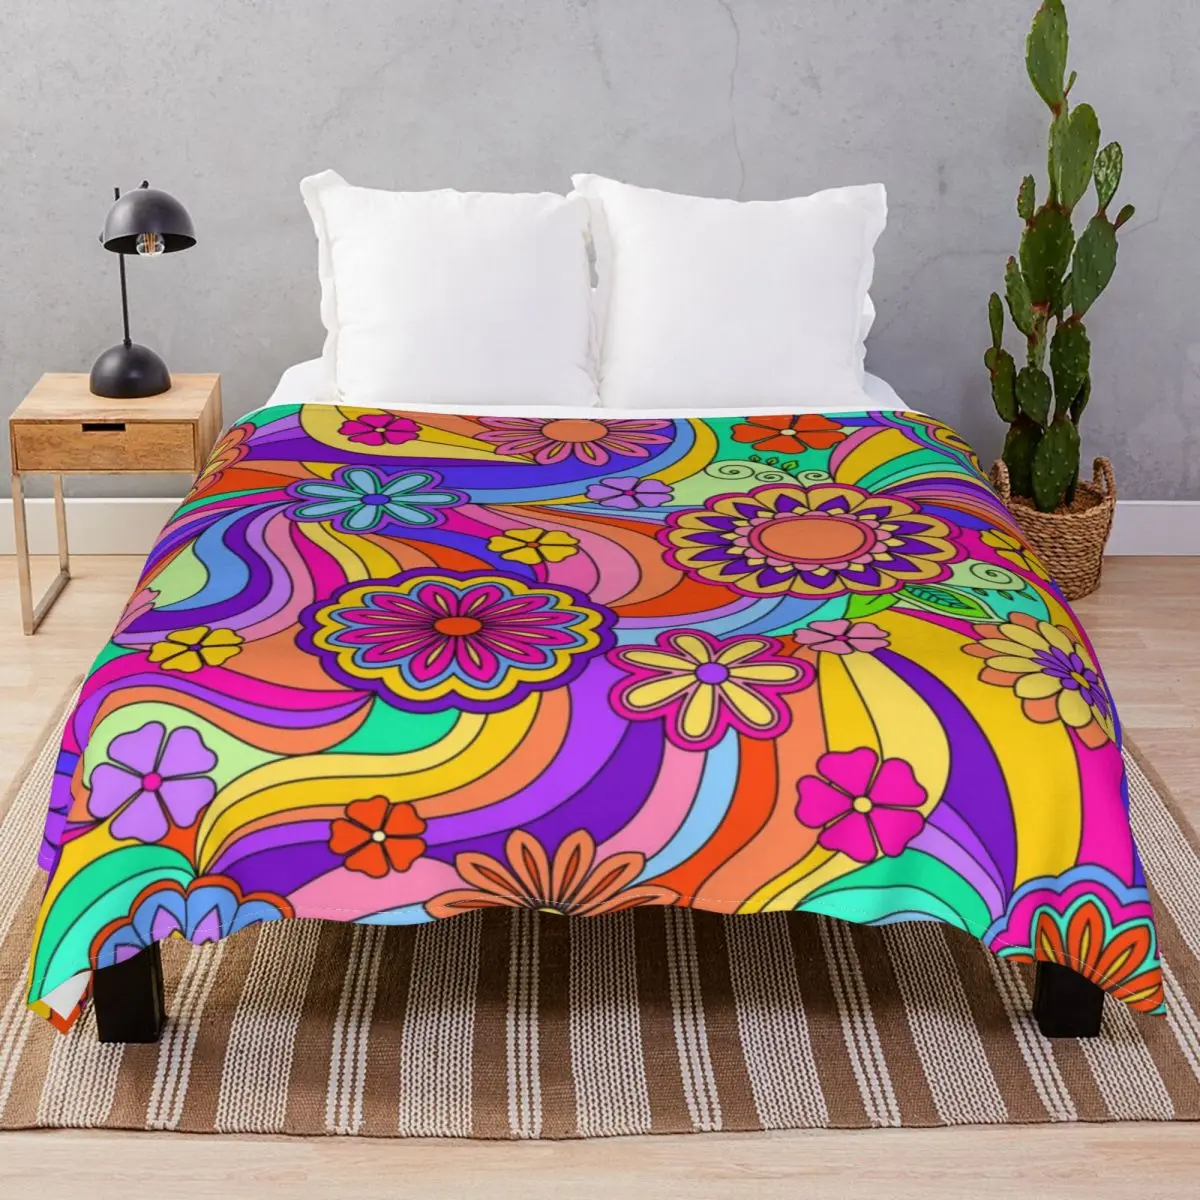 Groovy Psychedelic Flower Power Blankets Flannel Plush Decoration Super Warm Throw Blanket for Bed Home Couch Travel Cinema